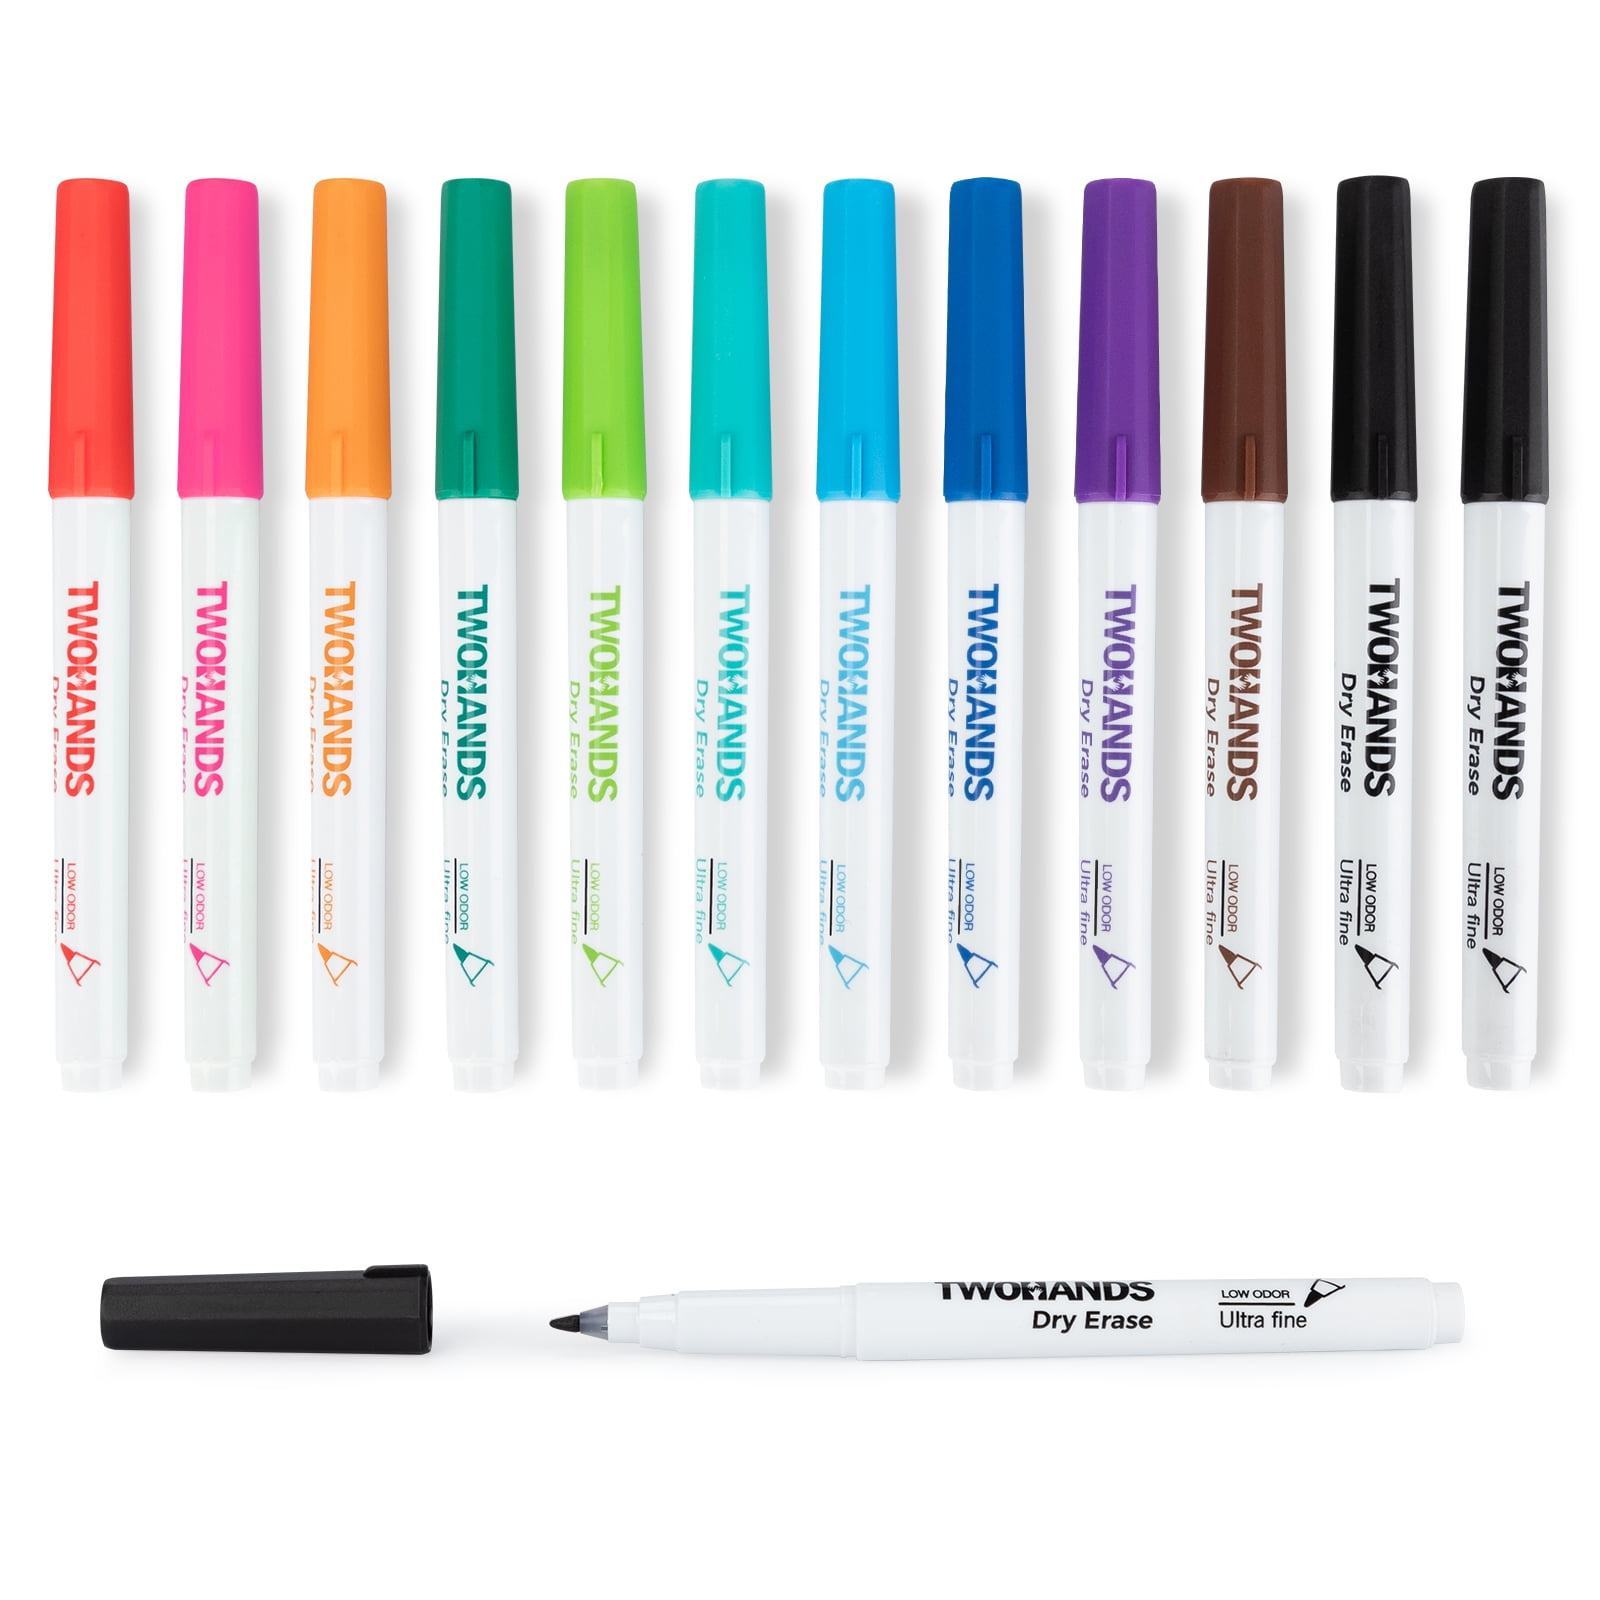 XSG Dry Erase Markers Ultra Fine Tip，0.7mm Ultra Fine Point Dry Erase  Markers，12 Assorted Colors Whiteboard Markers For Adults & Kids，Low  Odor，Extra